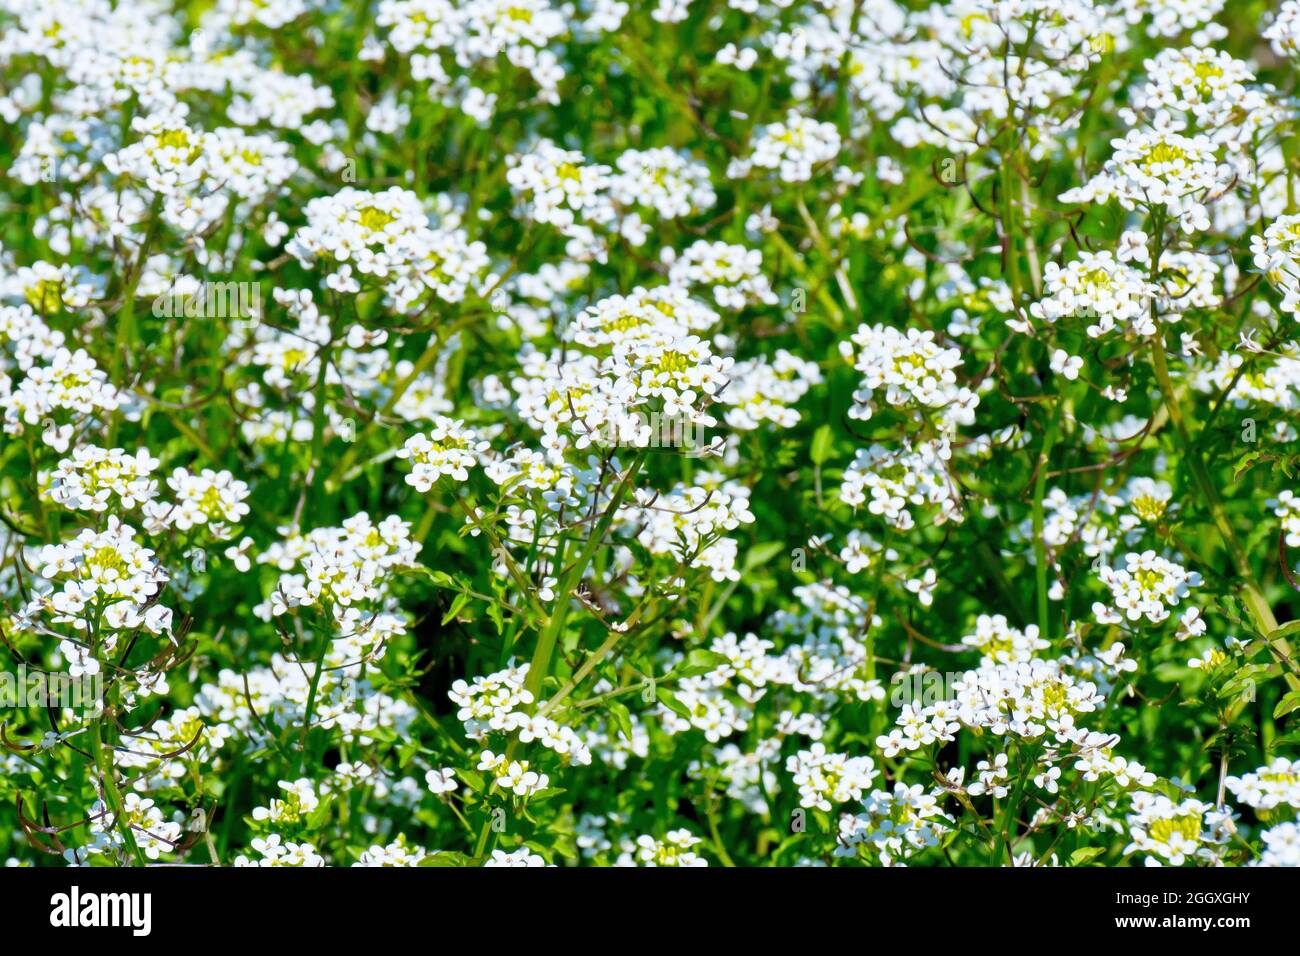 Water-cress (nasturtium officinale), an image showing a mass of the white flowered plant growing at the bottom of a roadside ditch. Stock Photo